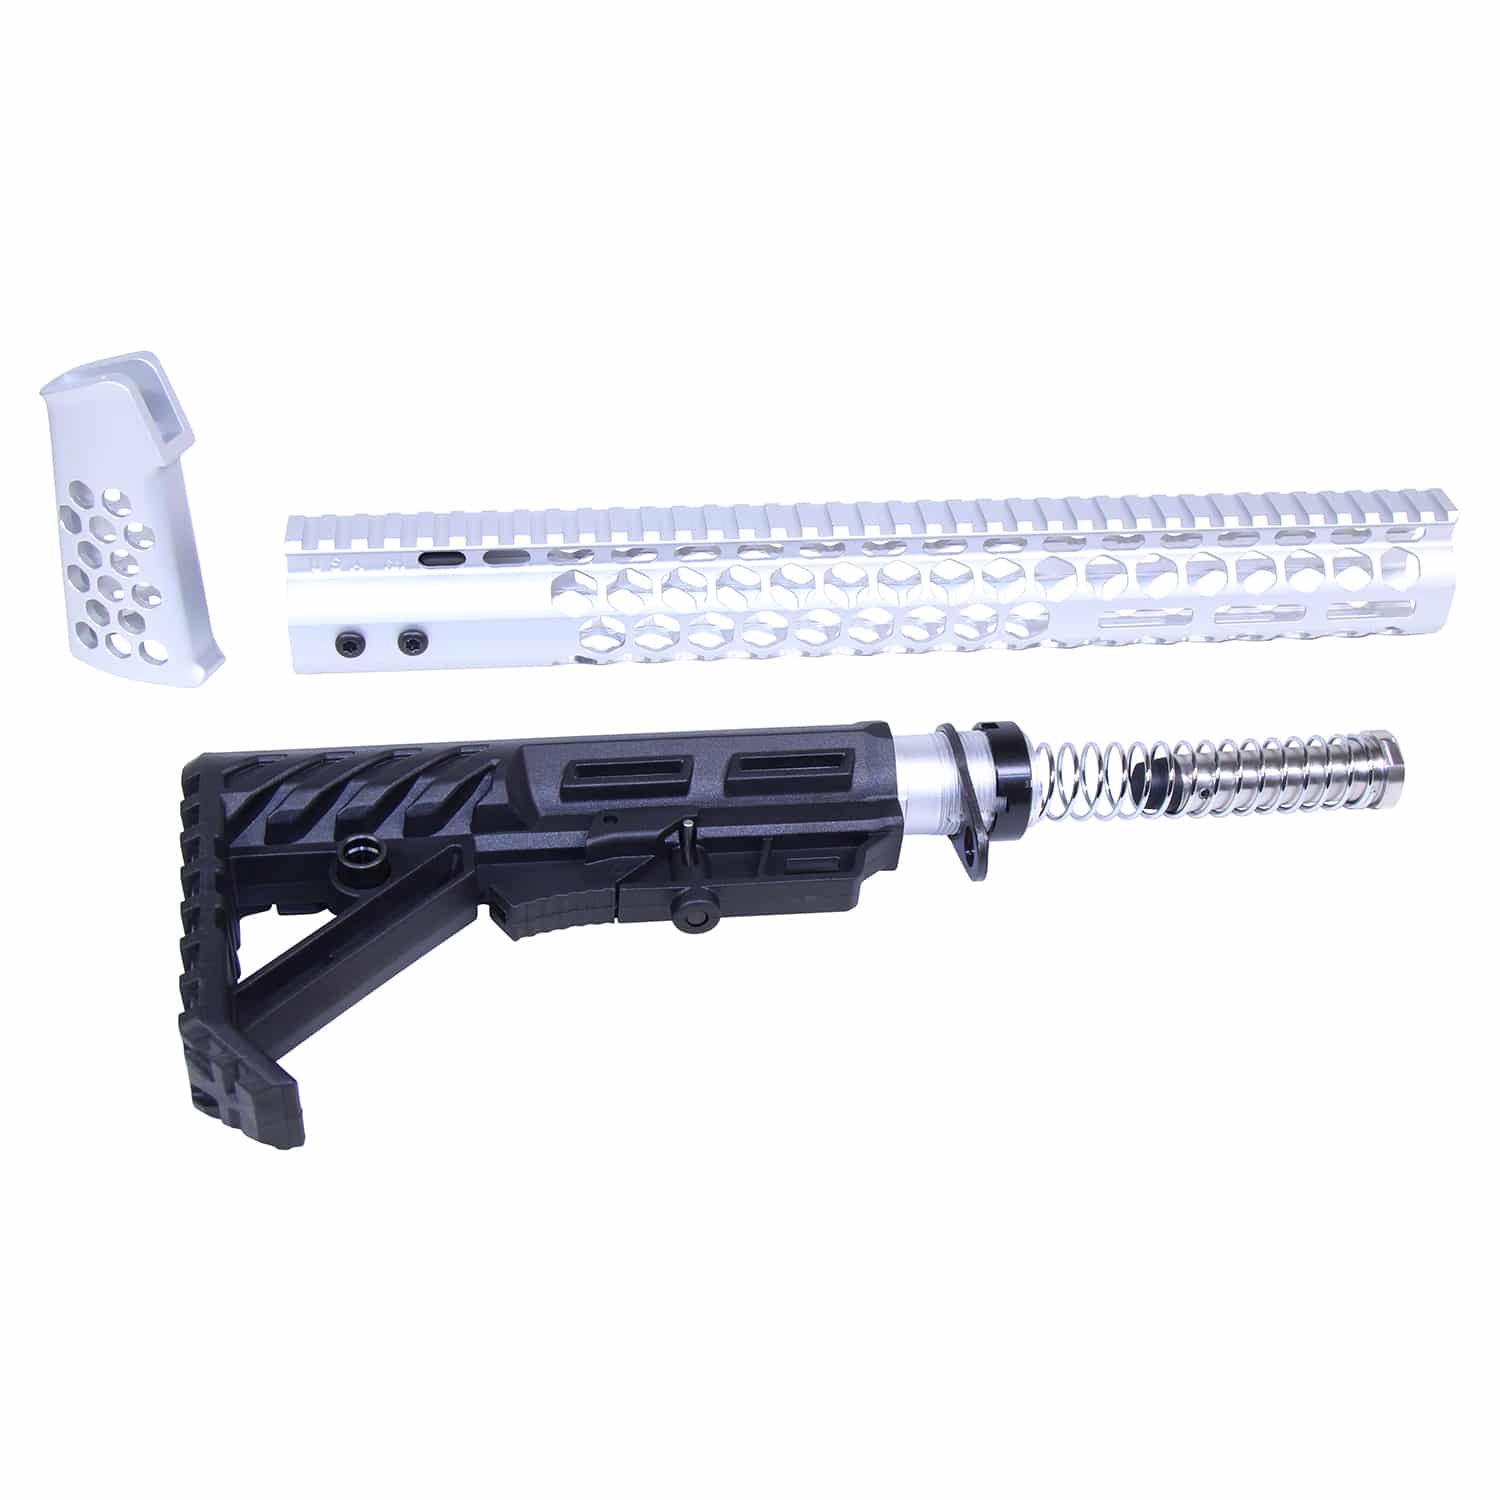 AR-15 Honeycomb Series Complete Rifle Furniture Set in Anodized Clear Aluminum